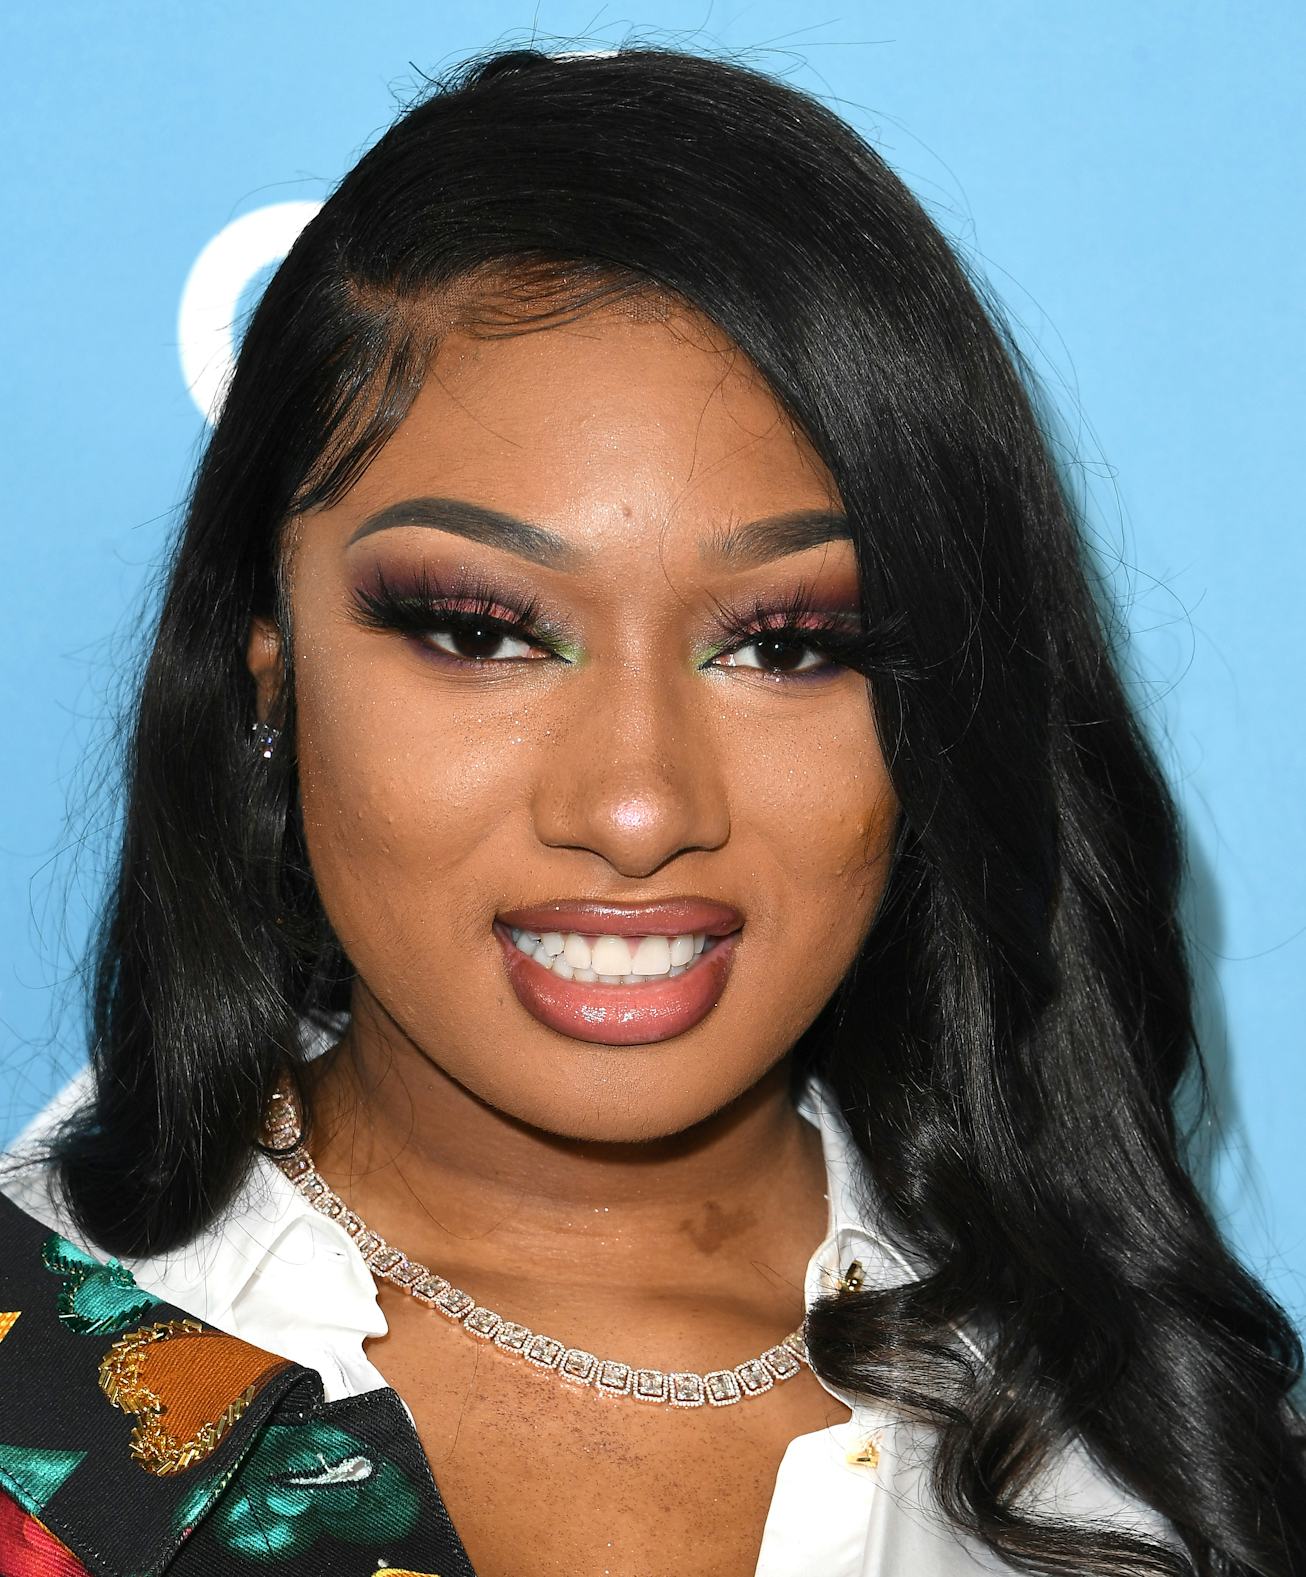 Megan Thee Stallion arrives at the 2019 Variety's Hitmakers Brunch at Soho House on December 07, 201...